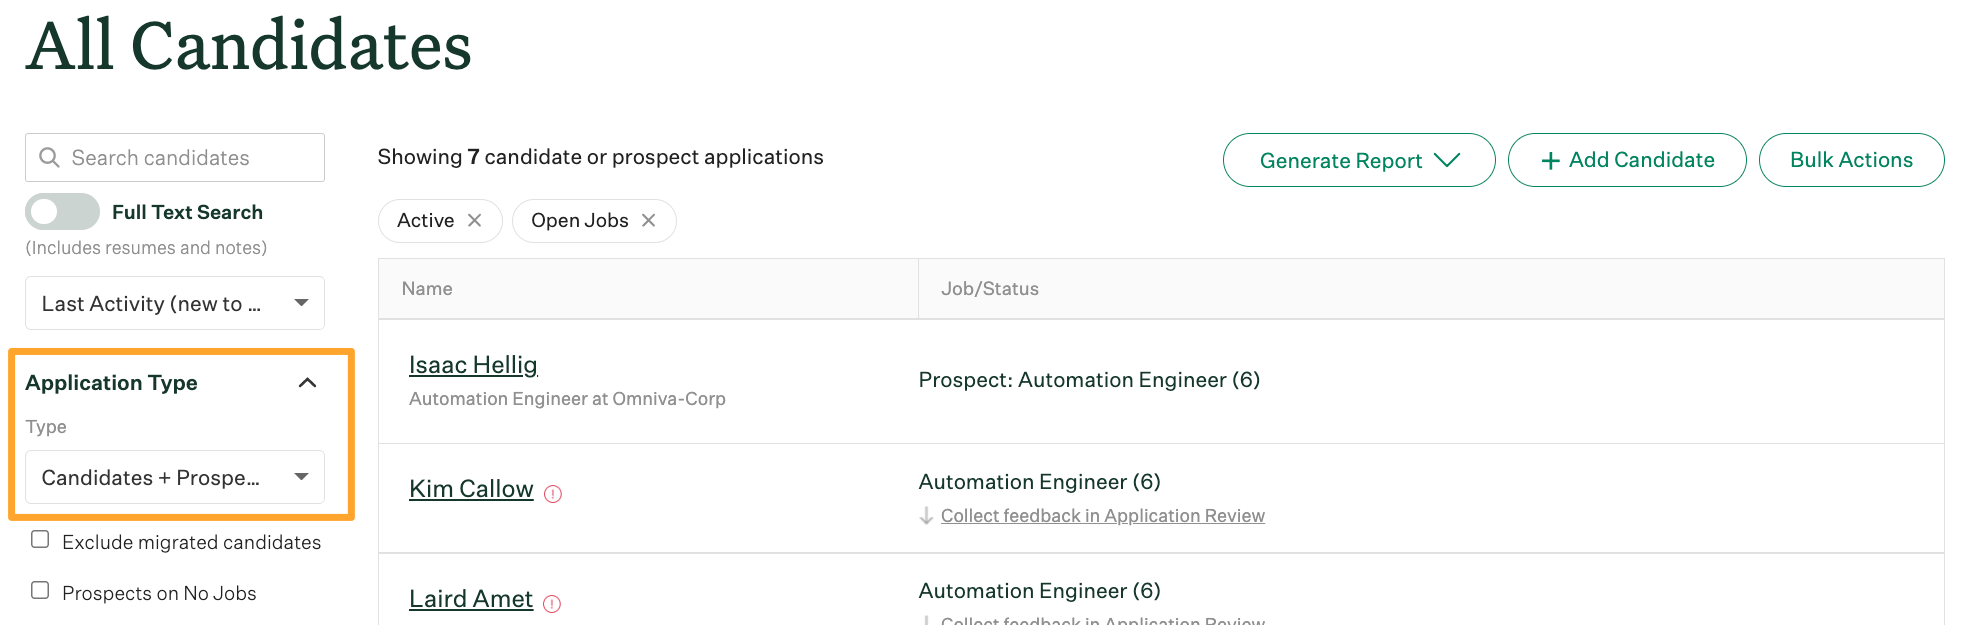 Greenhouse Recruiting shows the candidates page filtered by application type to only show prospects